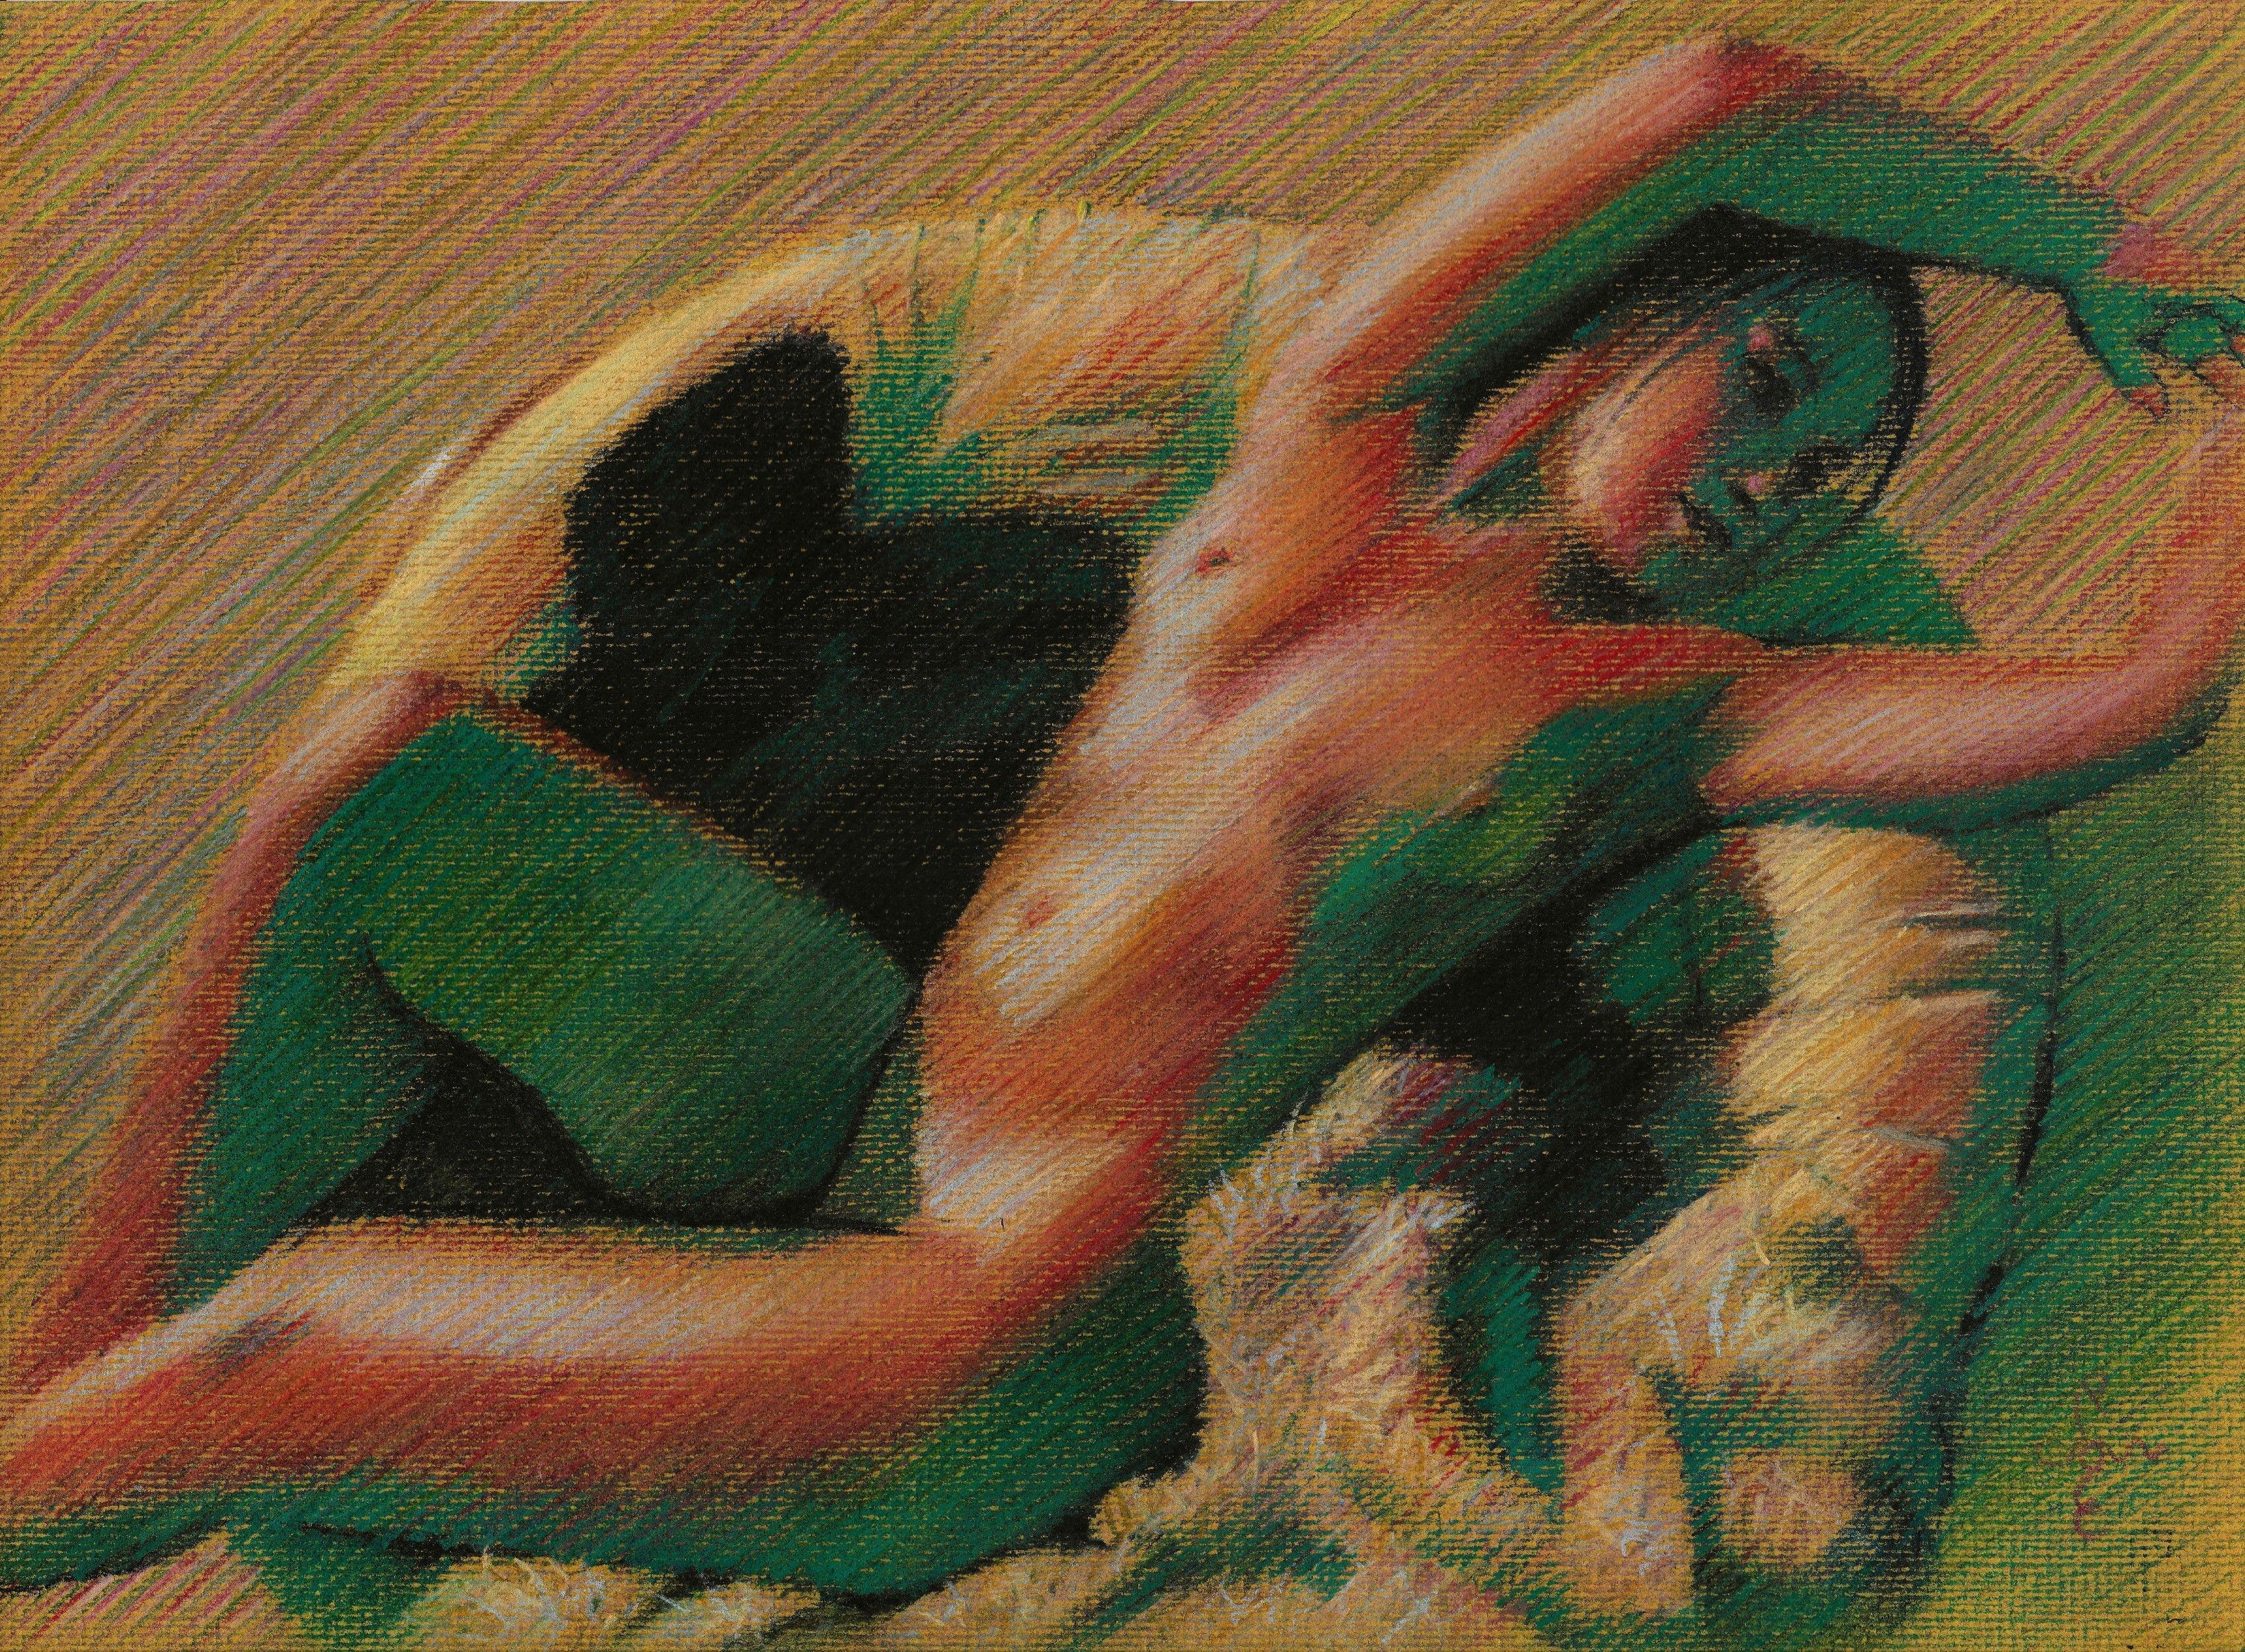 Risque â€“ 24-03-22, Drawing, Pastels on Paper - Art by Corne Akkers